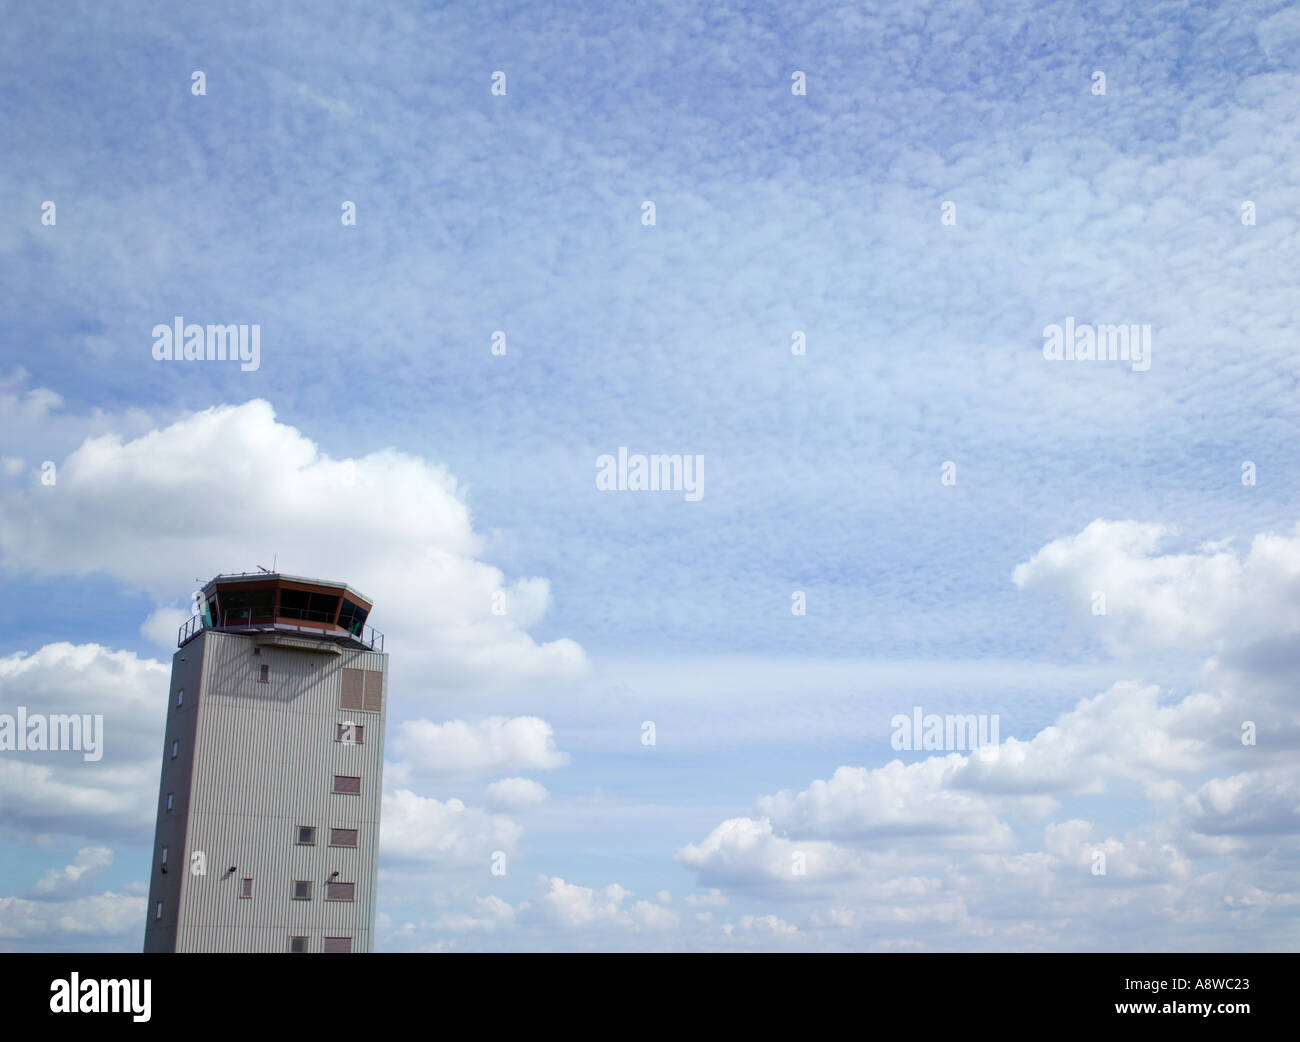 Airport control tower with blue sky and clouds in background Stock Photo